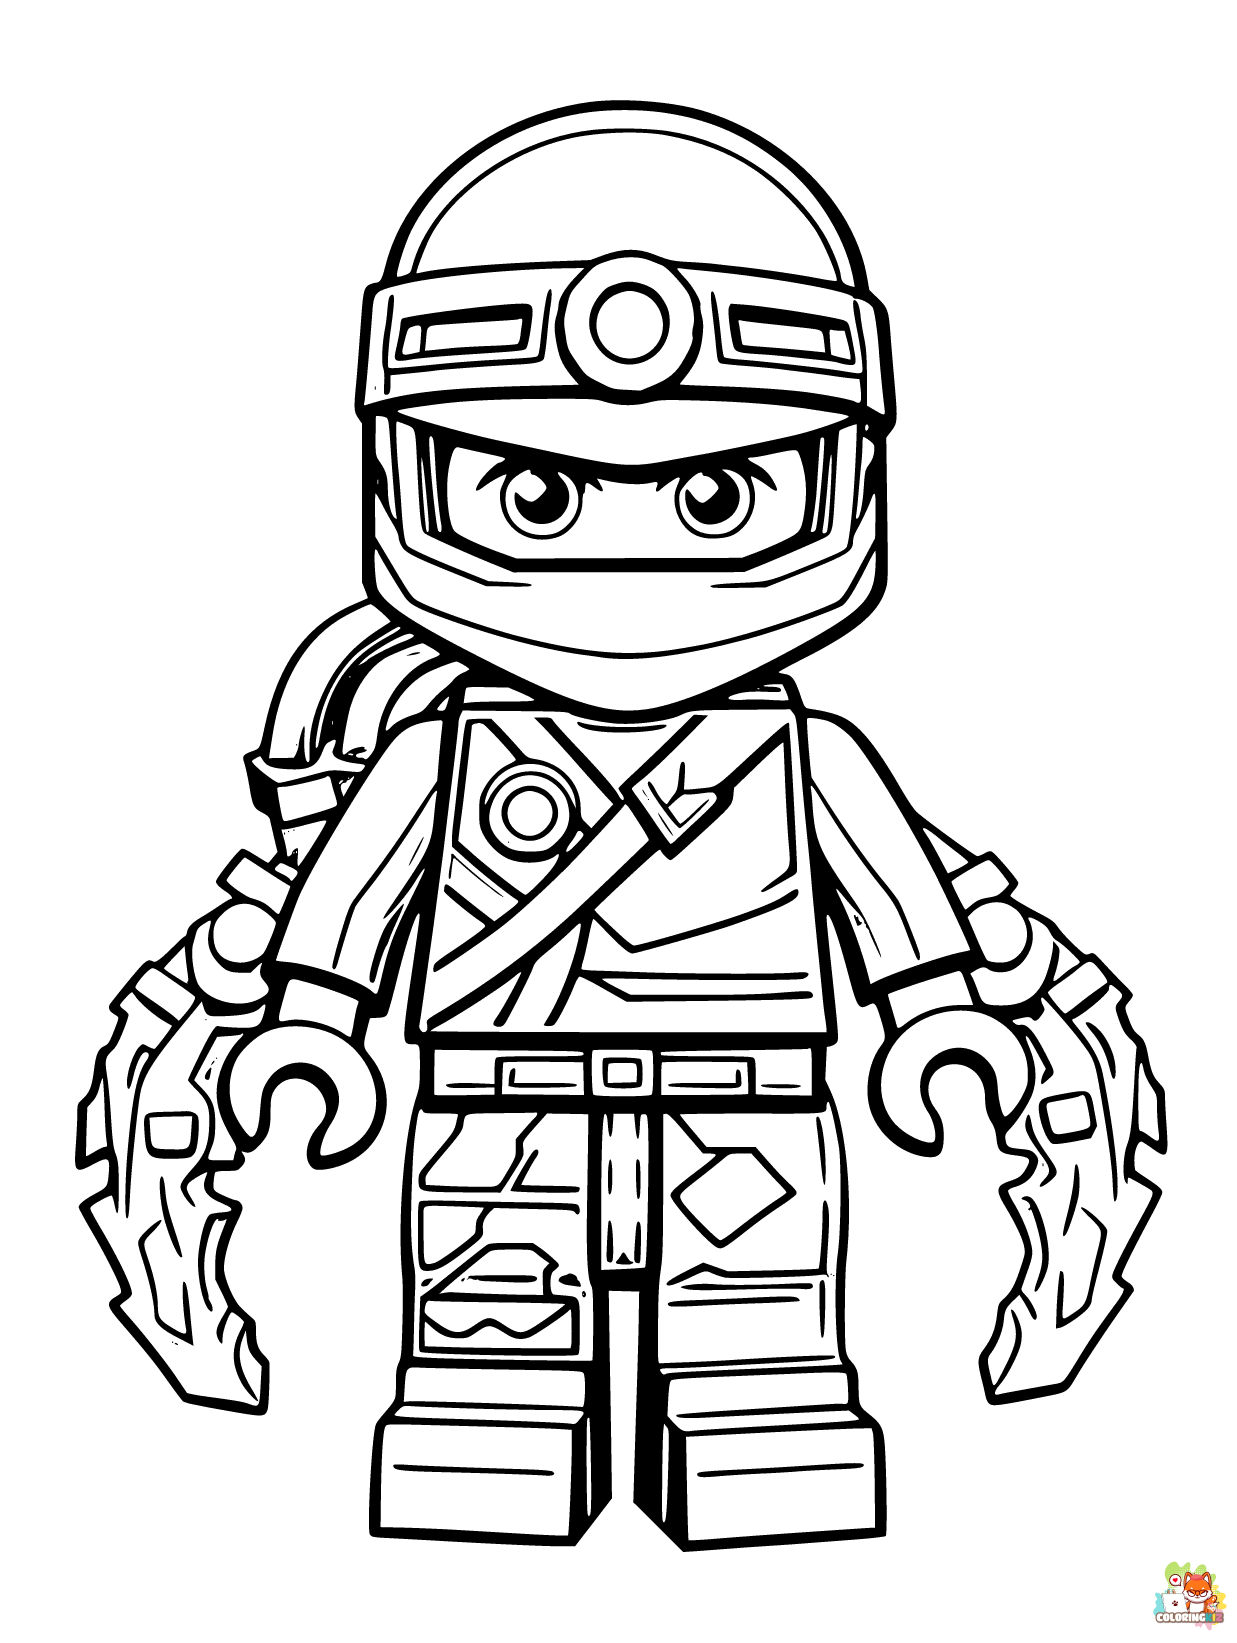 Free lego ninjago coloring pages for kids